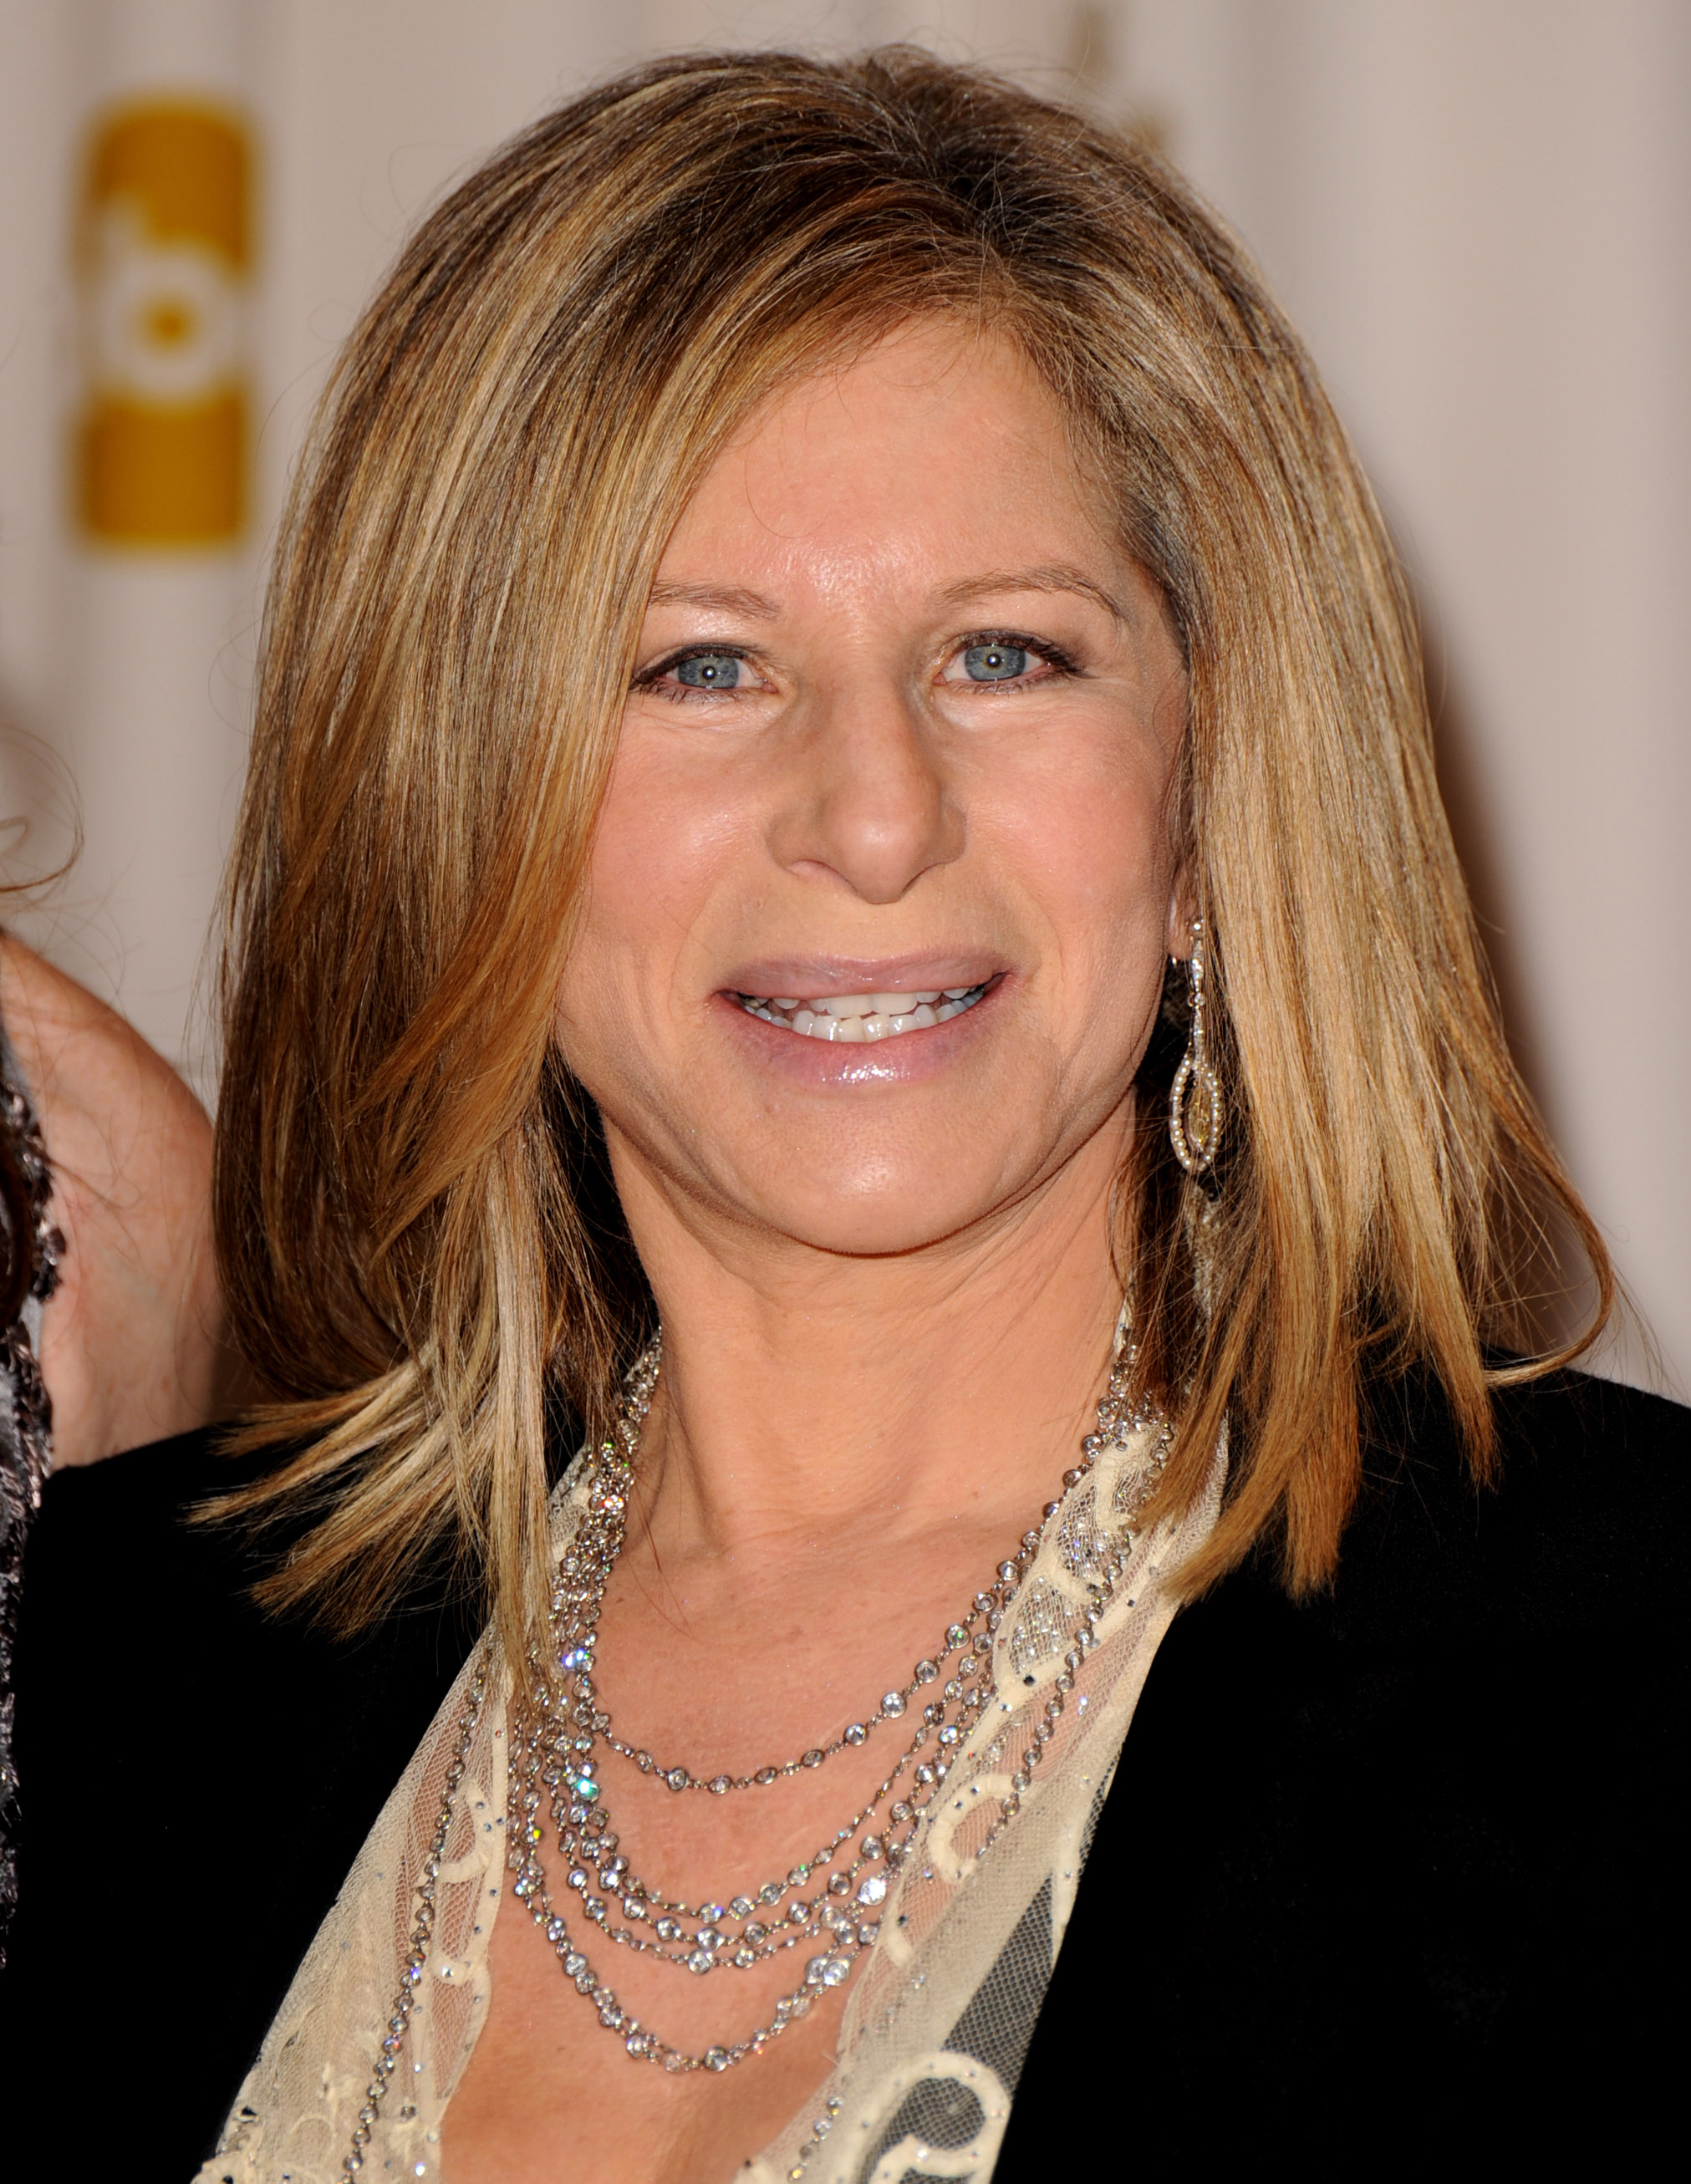 Barbra Streisand at the 82nd Annual Academy Awards held on March 7, 2010 | Source: Getty Images